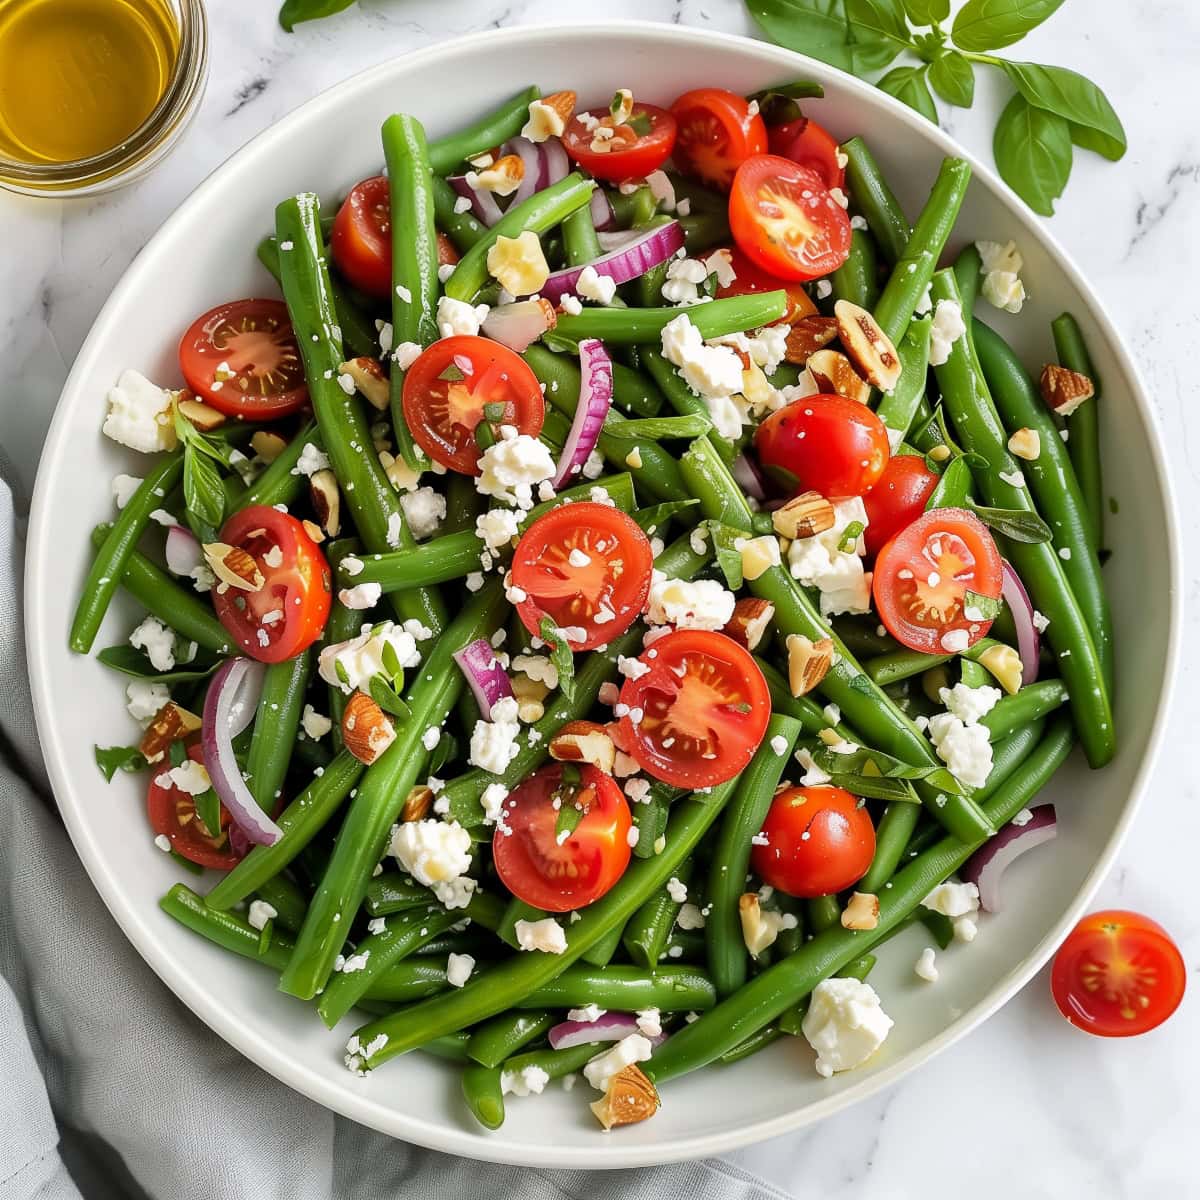 Fresh green bean salad with cherry tomatoes, red onions, and a tangy vinaigrette.